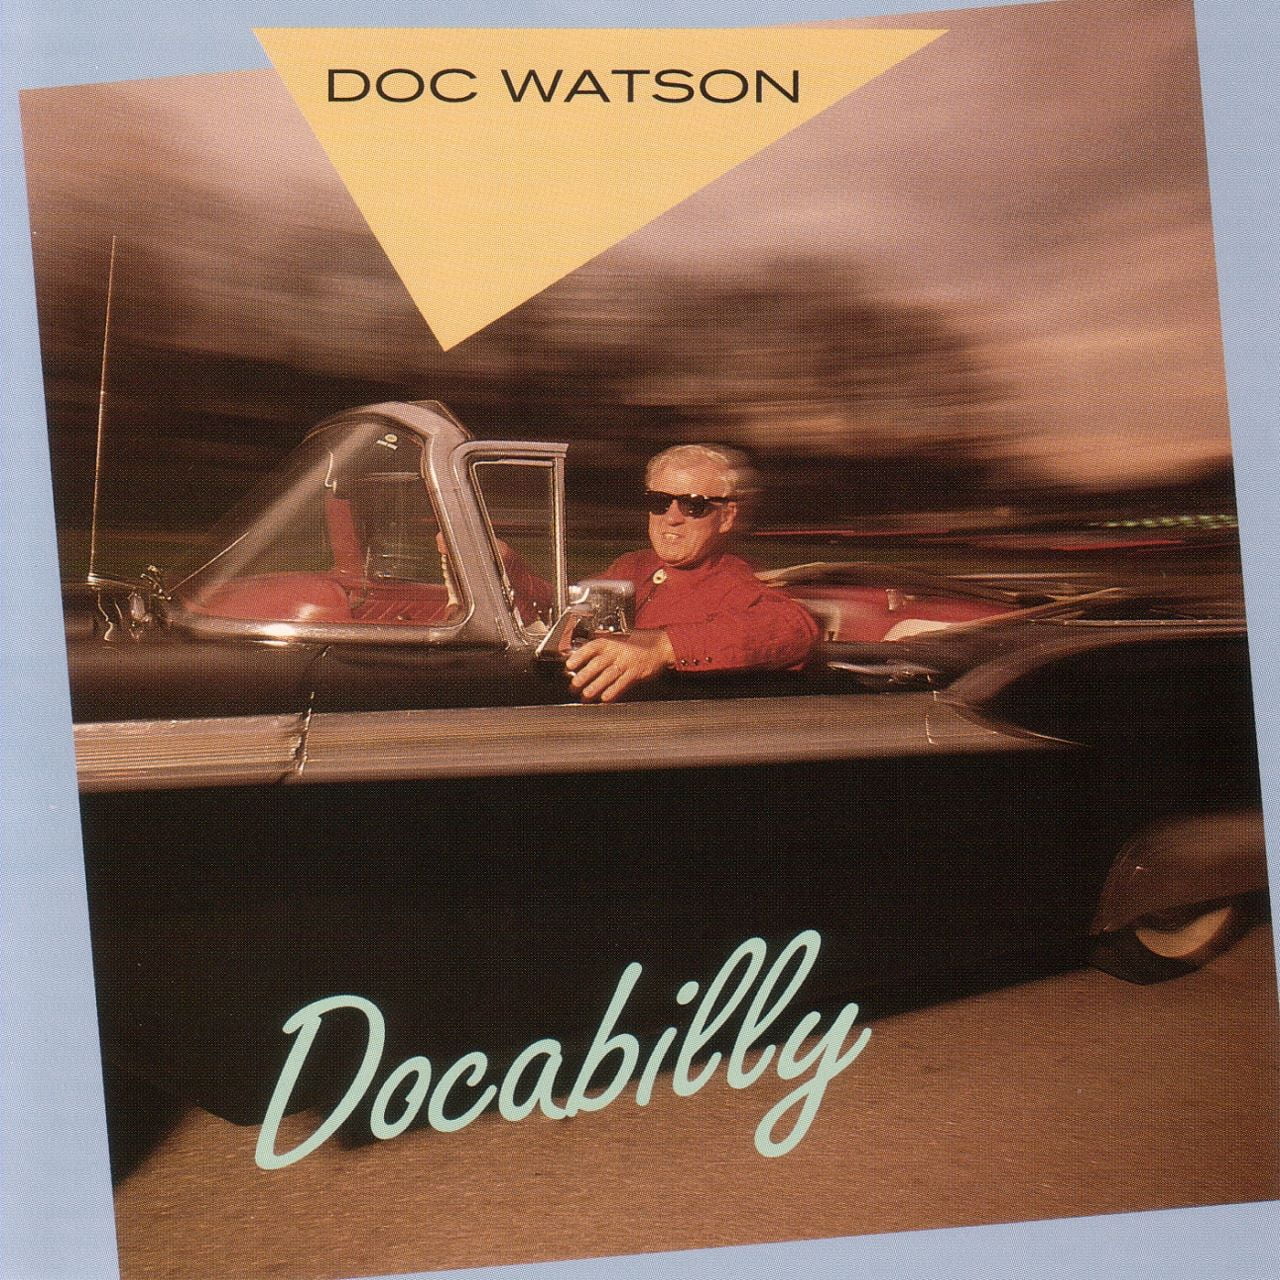 Doc Watson – Docabilly cover album